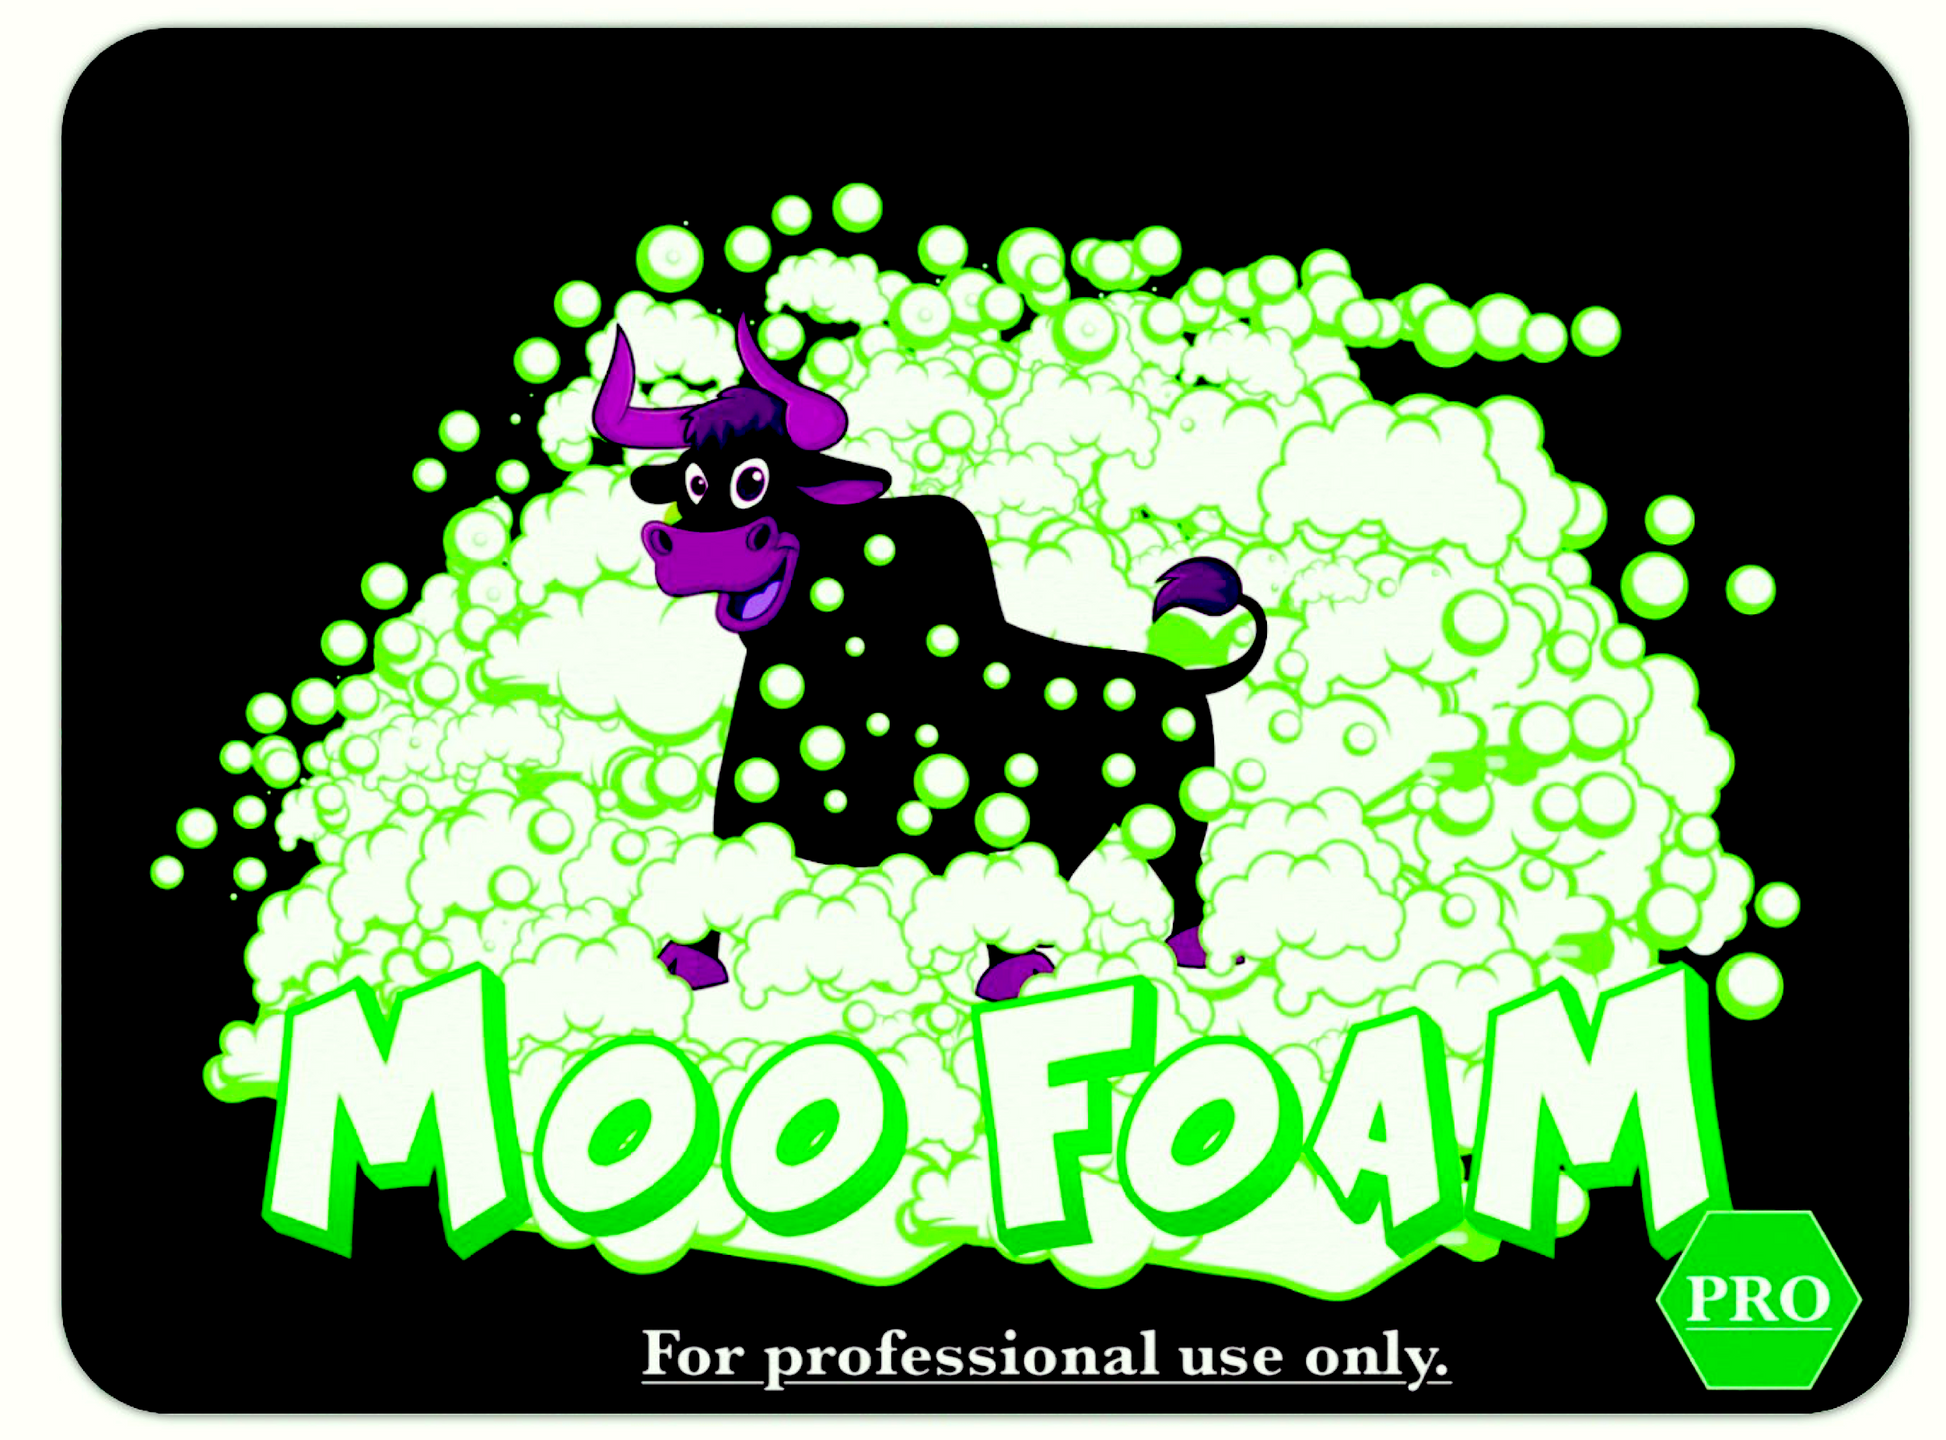 Foam Party solution. Color and appearance is glowing green when used with UV or Black lights. 